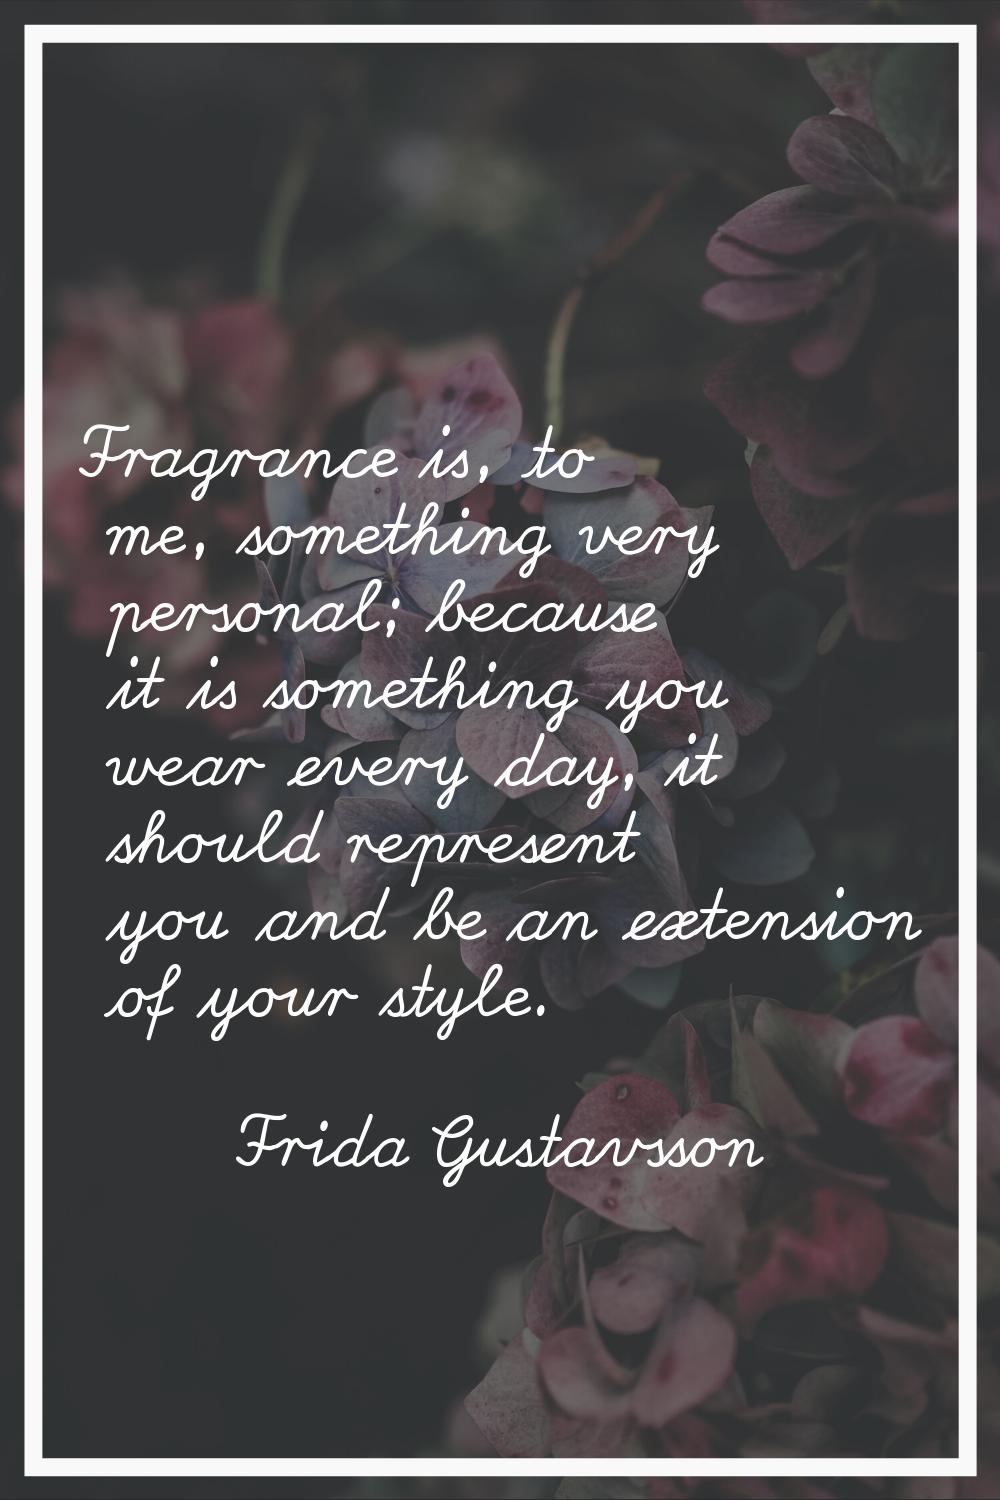 Fragrance is, to me, something very personal; because it is something you wear every day, it should